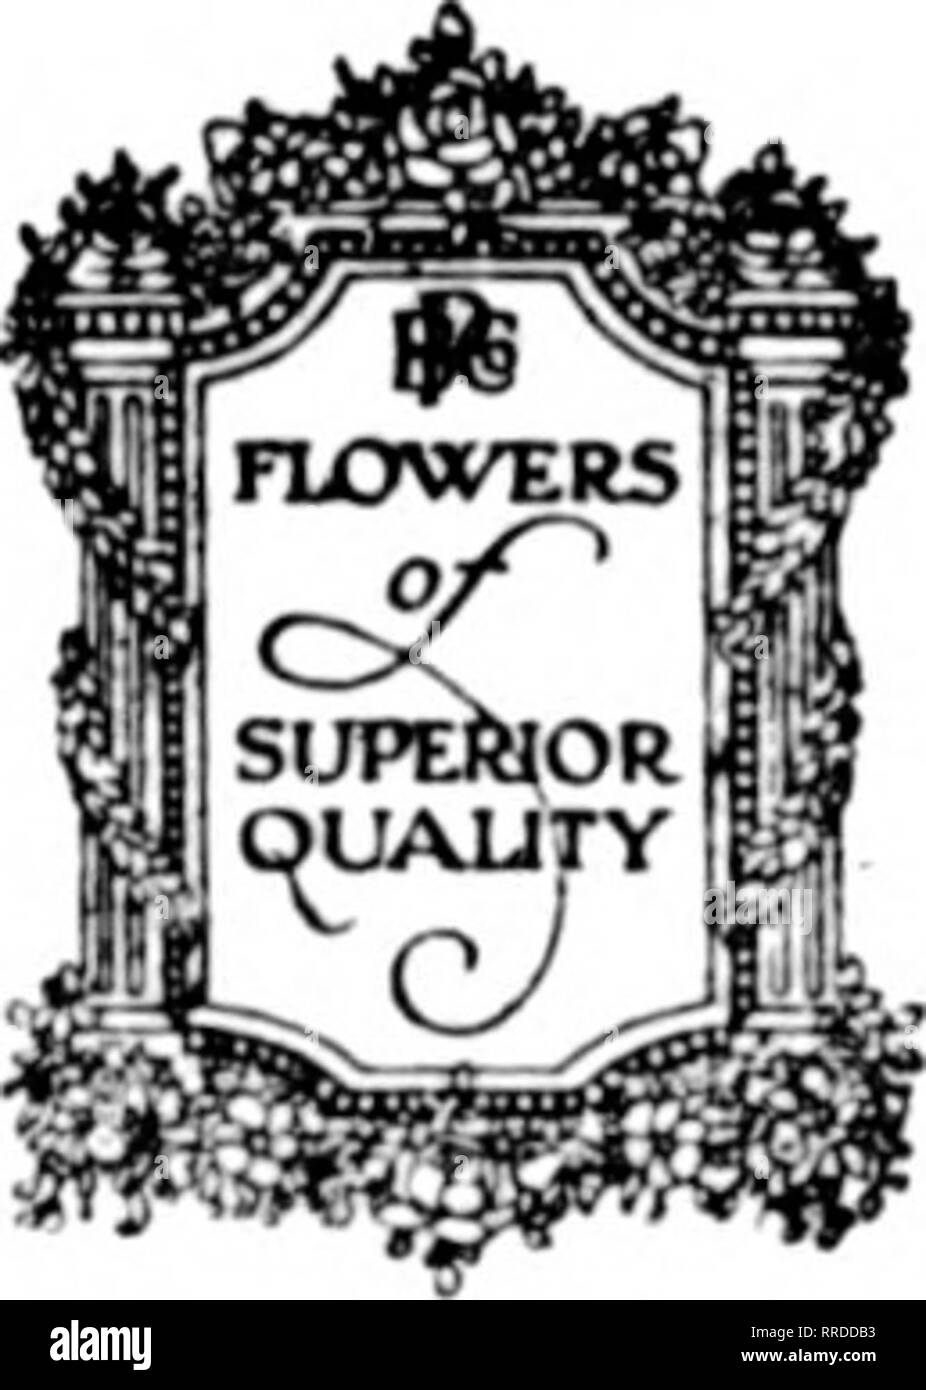 . Florists' review [microform]. Floriculture. The Florists^ Rcvfcw Jdni 16, 1921 WEDDING ORCHIDS Cattleya Gigas—The deep lavender Wedding Orchid in splendid supply Valley for the June Bride i$|p^ A Quarter of a Million Valley &lt;^^ for Market in June Summer Novelty Flowers The growing demand for the attractive old- fashioned flowers has prompted us to offer still another group of &quot;Flowers of Superior Quality.&quot; For the present Cornflowers Feverfew Candytuft Gypsophila Sweet William Larkspur Coreopsis Daisies Gaillardia Snapdragon Order an assortment of these flowers today.. Please no Stock Photo